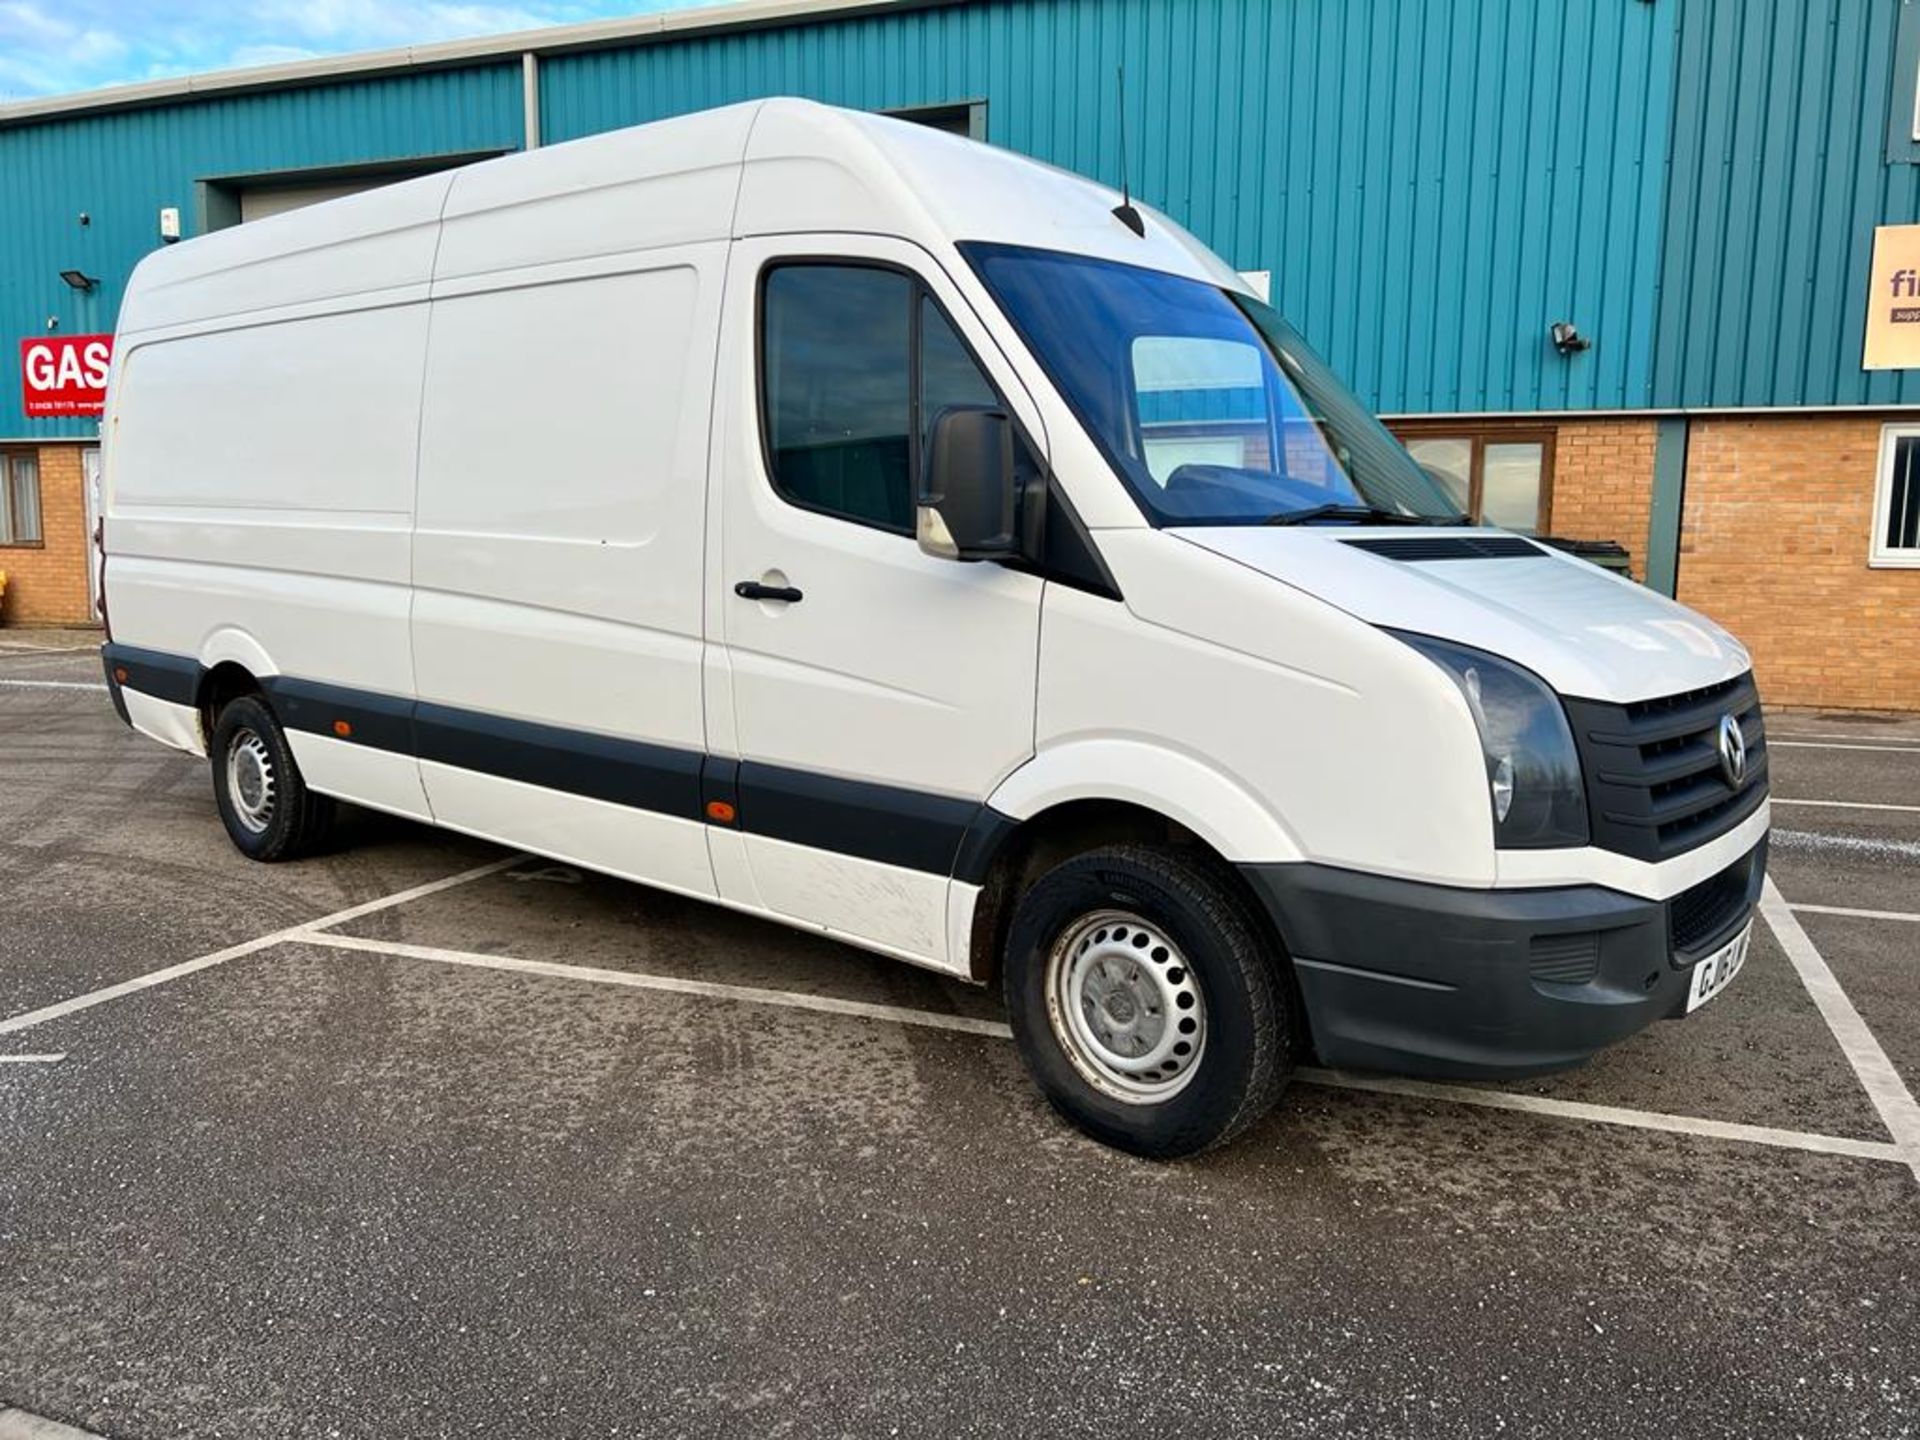 (RESERVE MET) Volkswagen Crafter CR35 2.0tdi 134bhp 'LWB HIGH ROOF' - 2016 16 Reg - fully ply lined